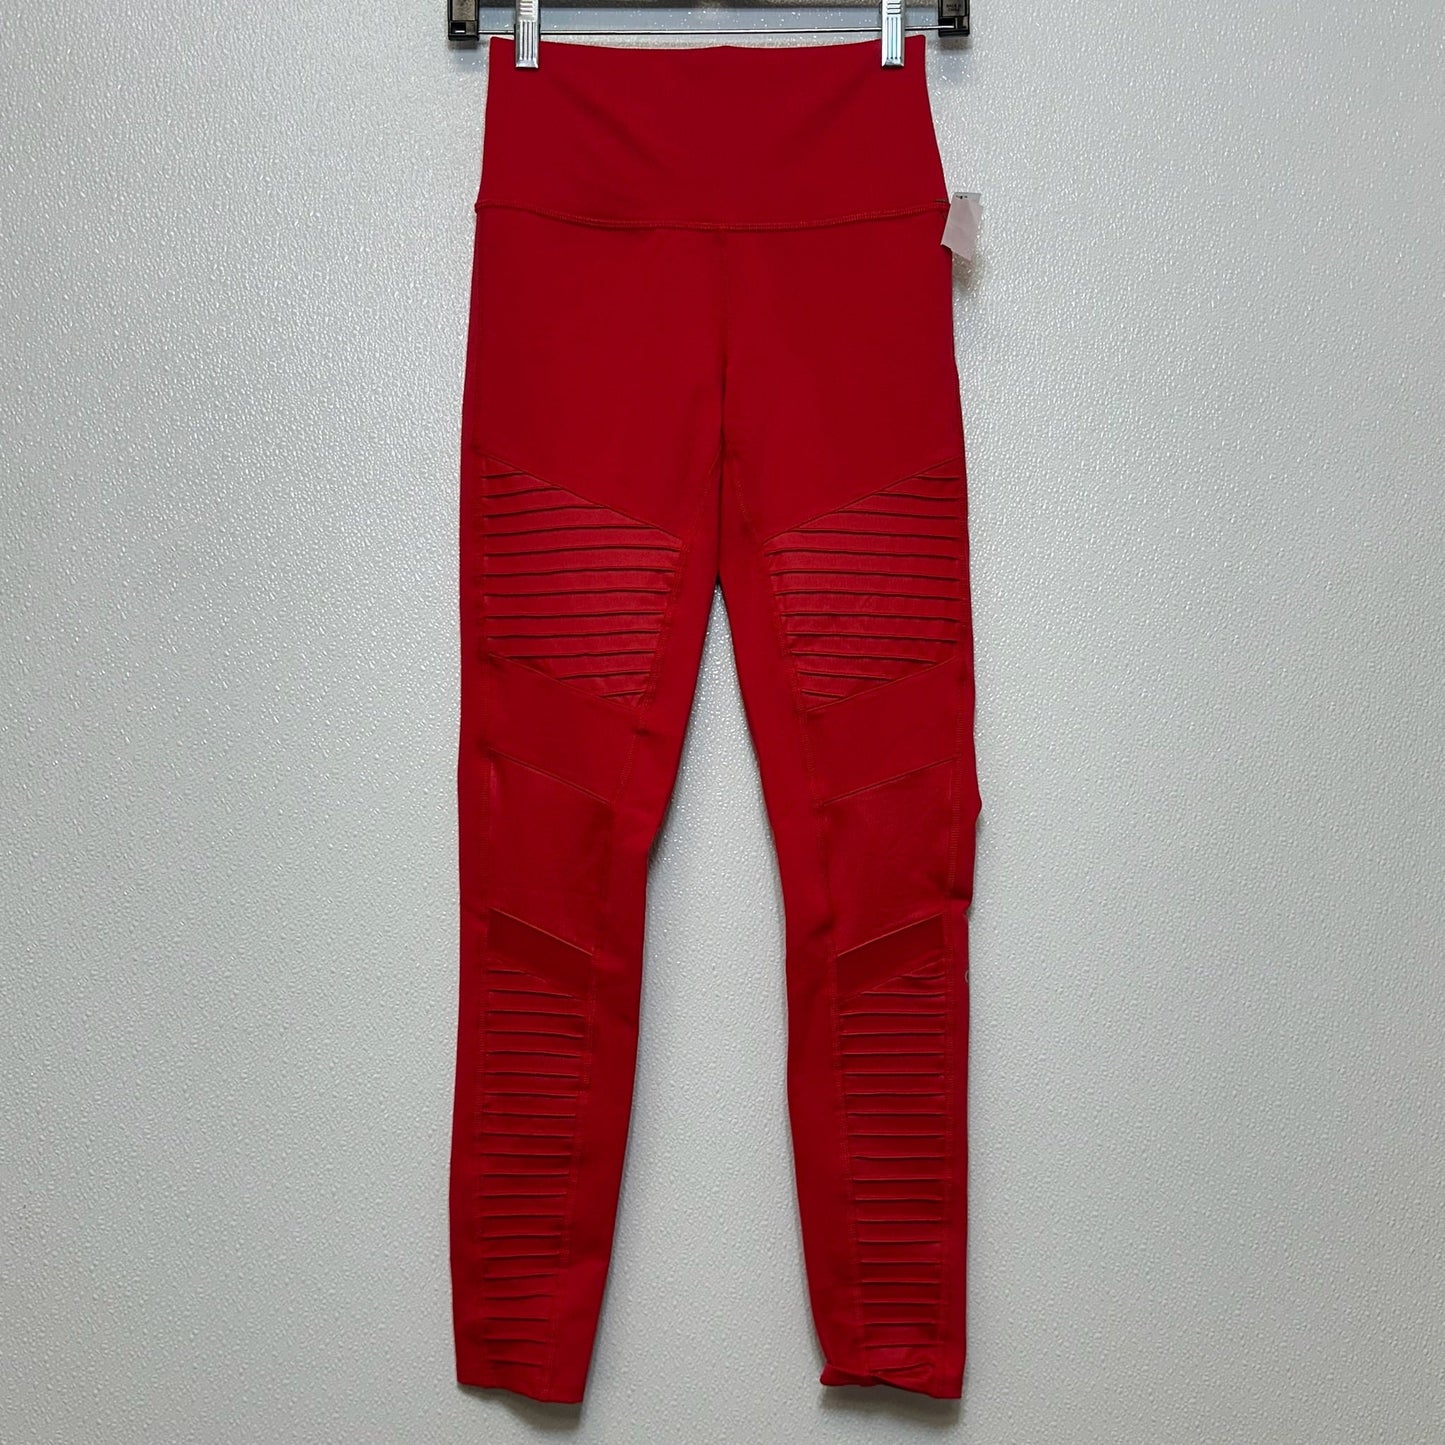 Red Athletic Leggings Alo, Size S